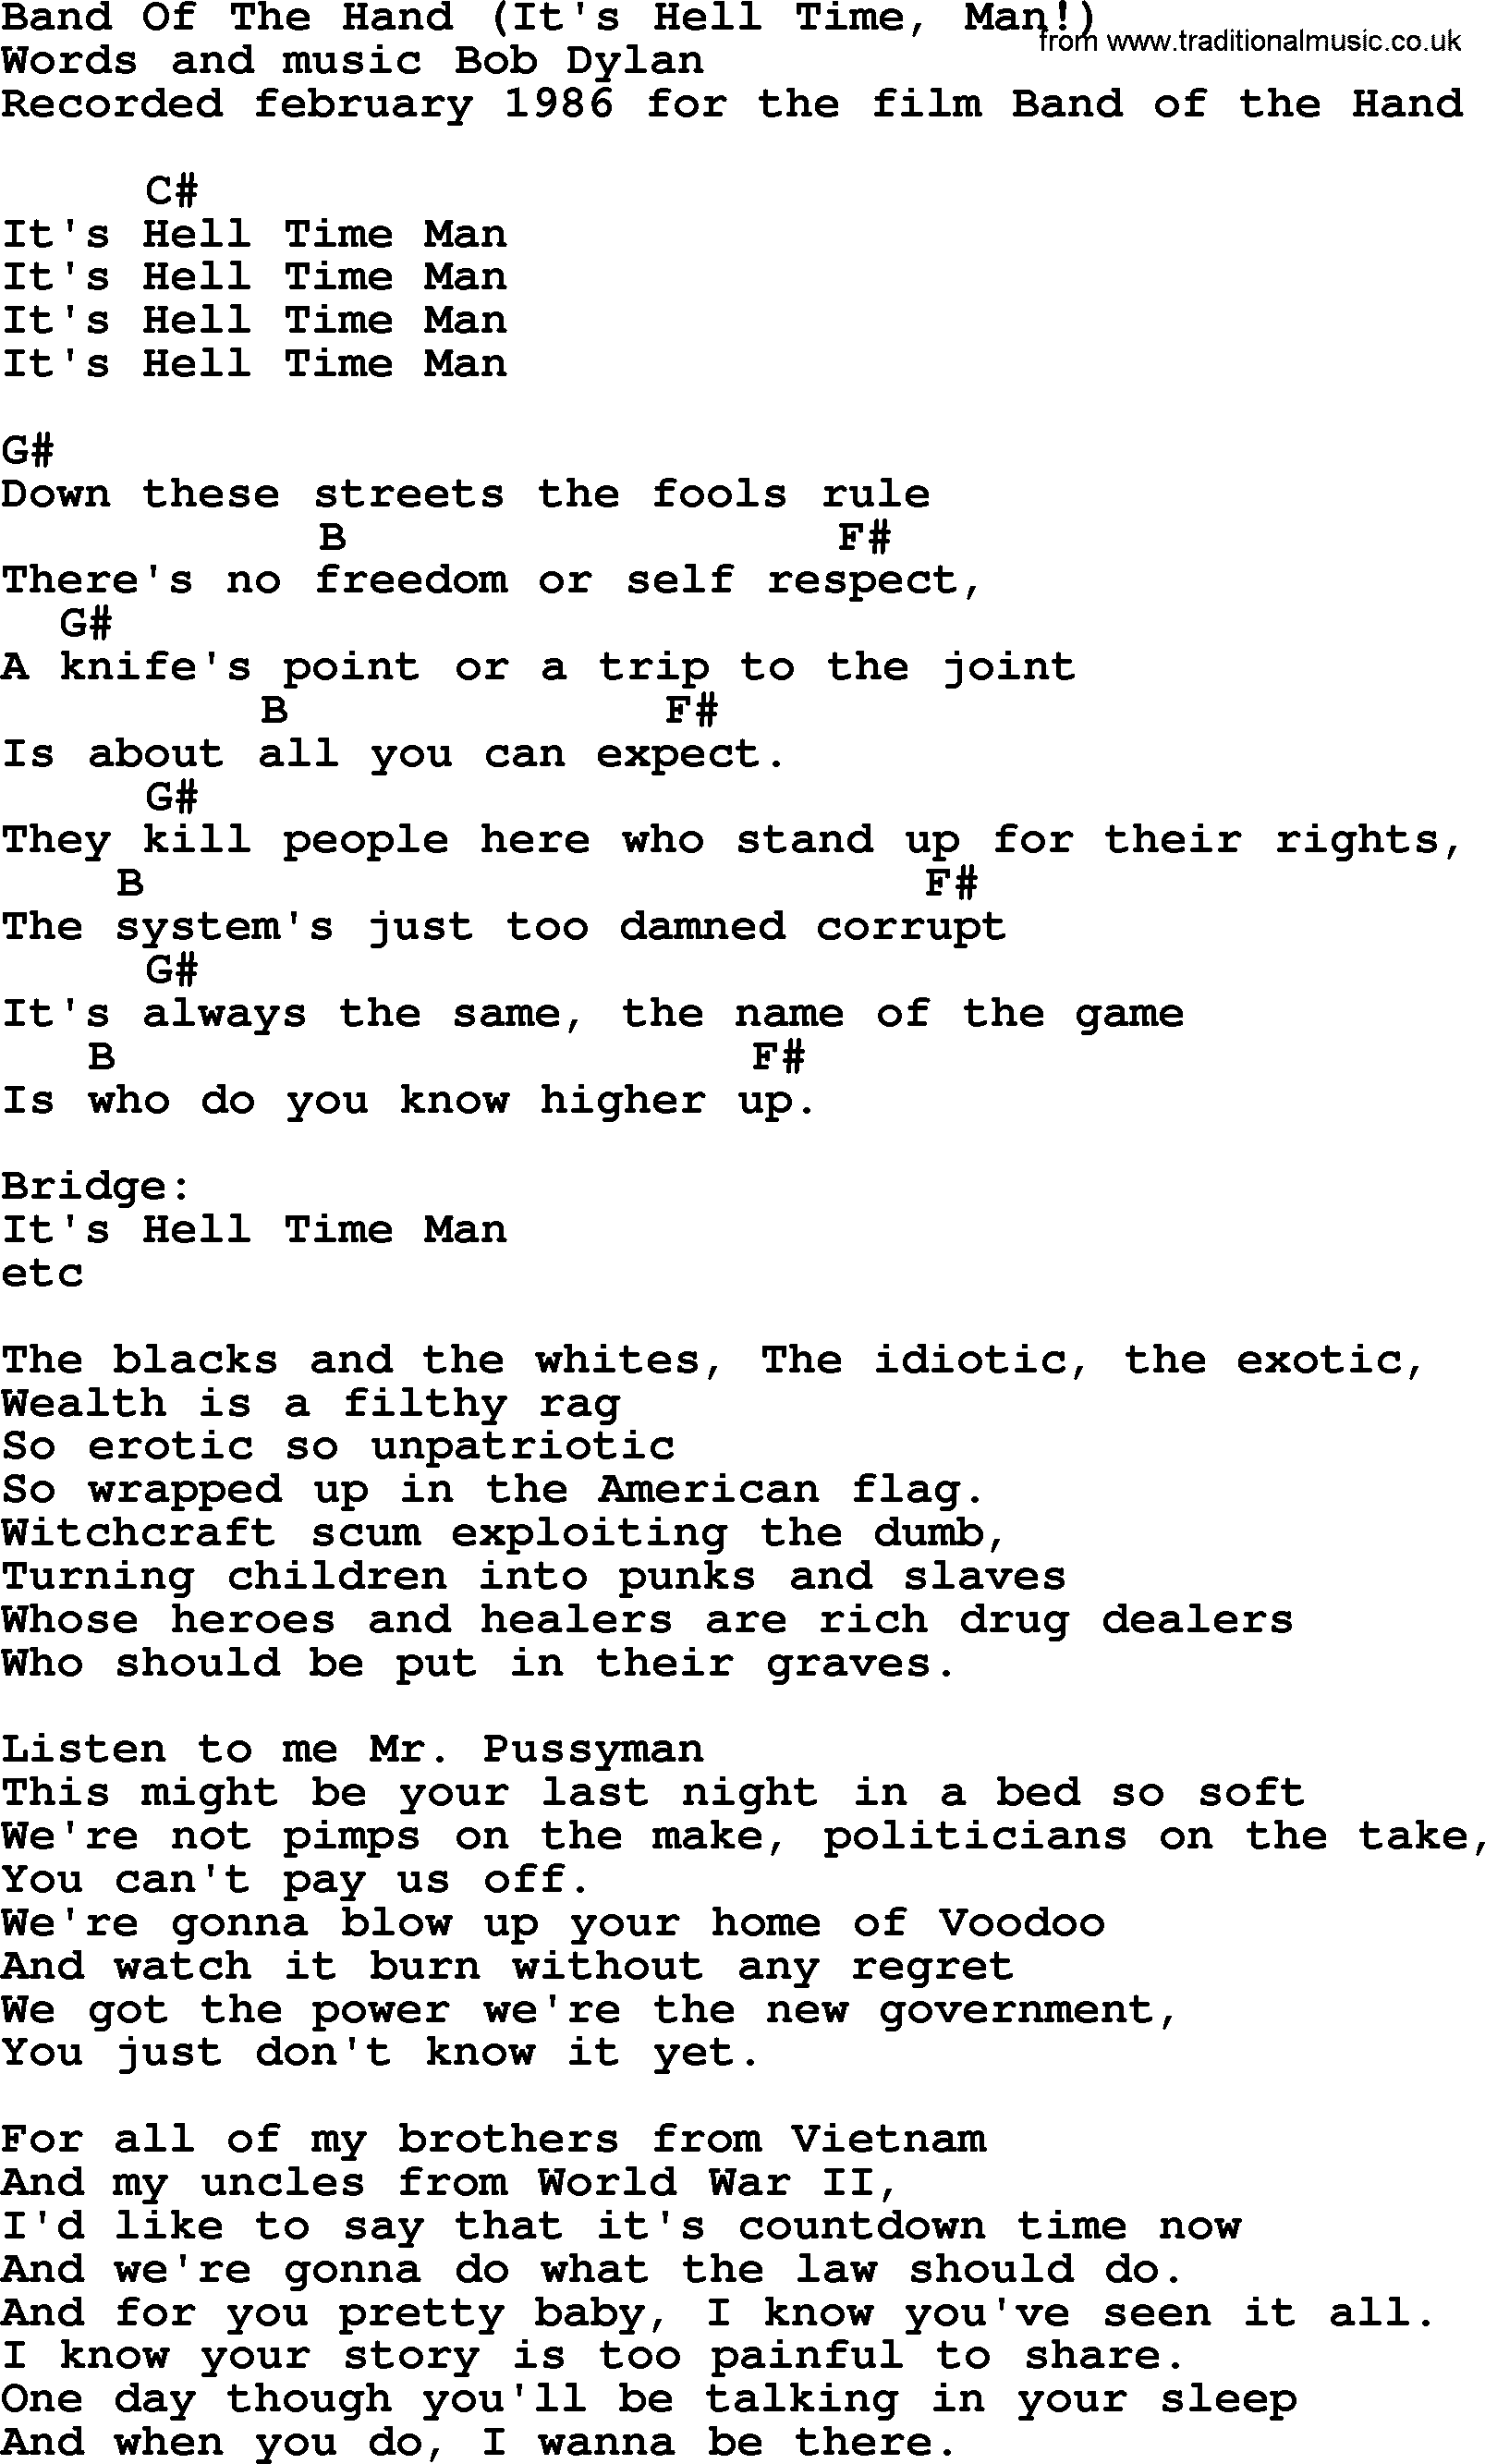 Bob Dylan song, lyrics with chords - Band Of The Hand (It's Hell Time, Man!)